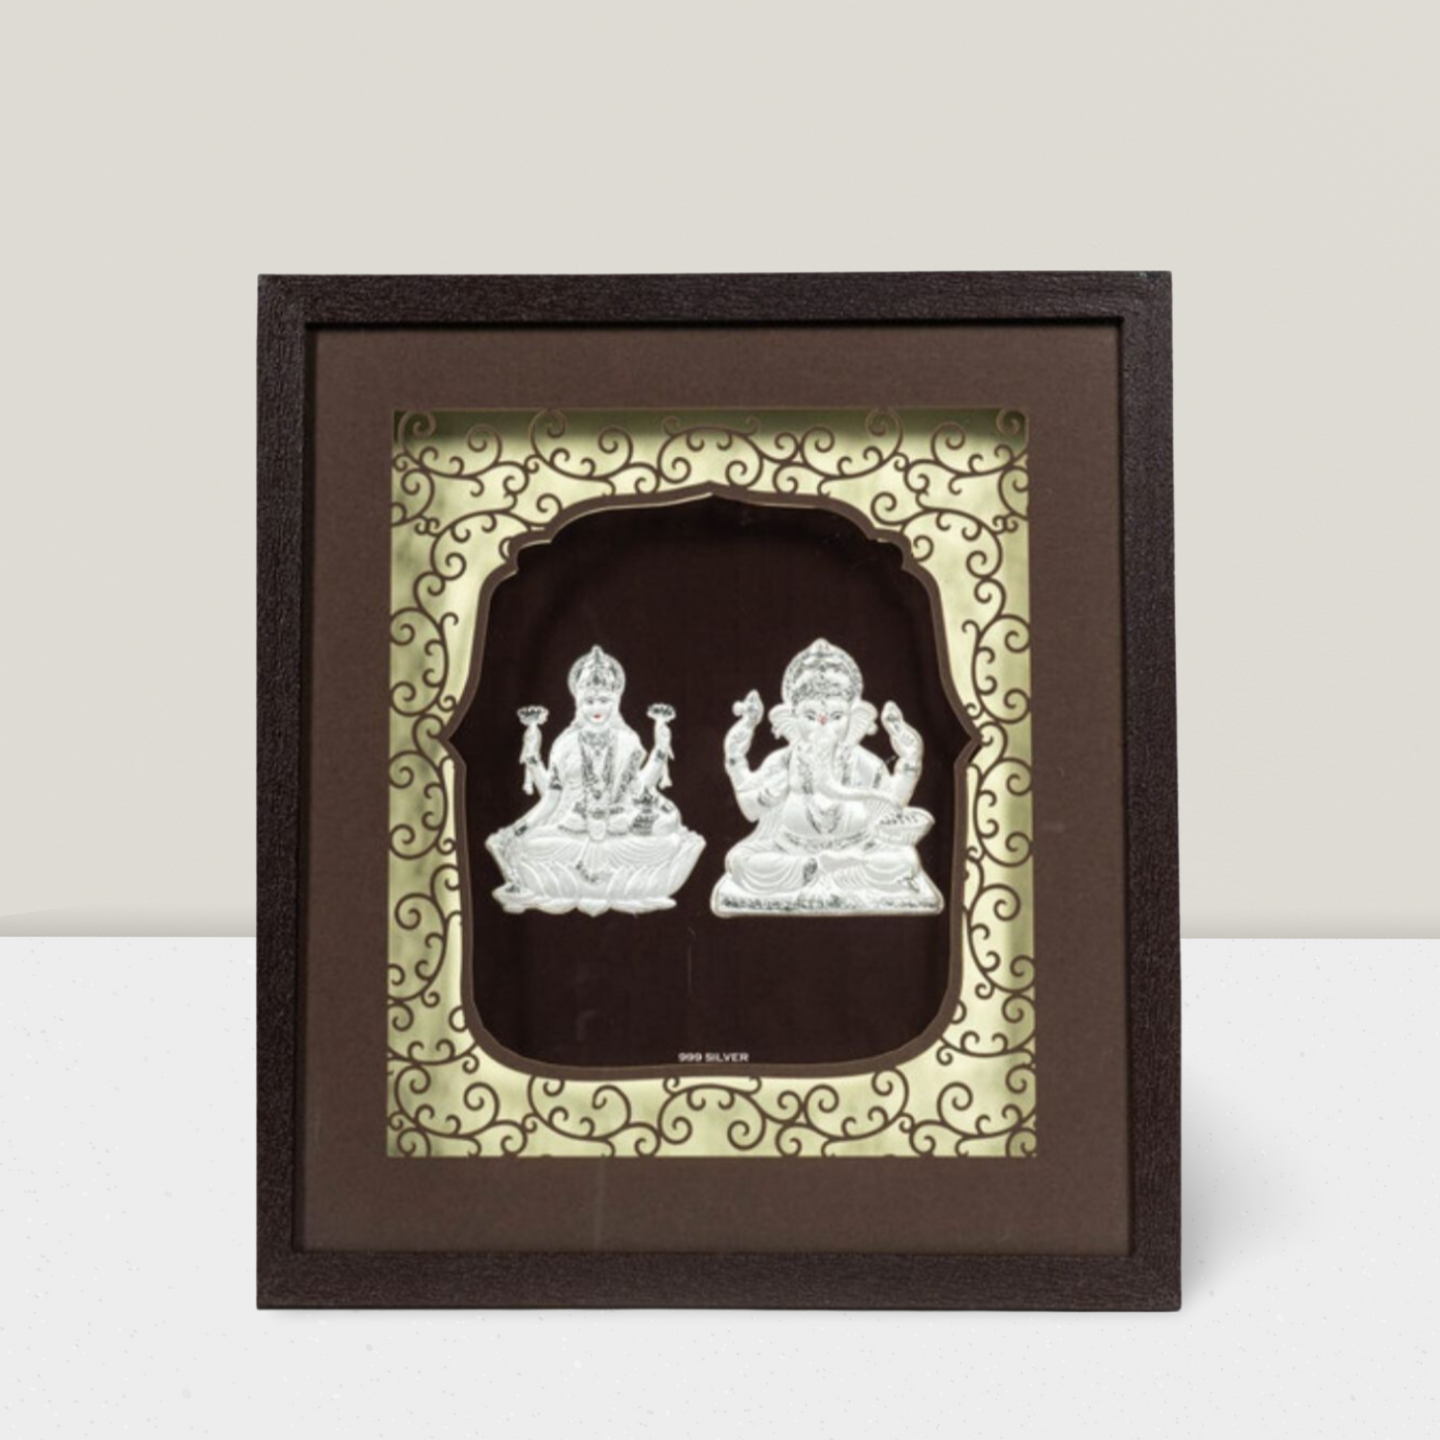 CANDRIN SILVER LED GOD FRAME / CANDRIN SILVER FRAME/ SILVER FRAME / LAXMI GANESH JI SILVER FRAME / CANDRIN LAXMI GANESH JI LED FRAME / SILVER FOIL LAXMI GANESH / CANDRIN /SILVER GOD FRAME / LAXMI GANESH JI SILVER FRAME WITH LED